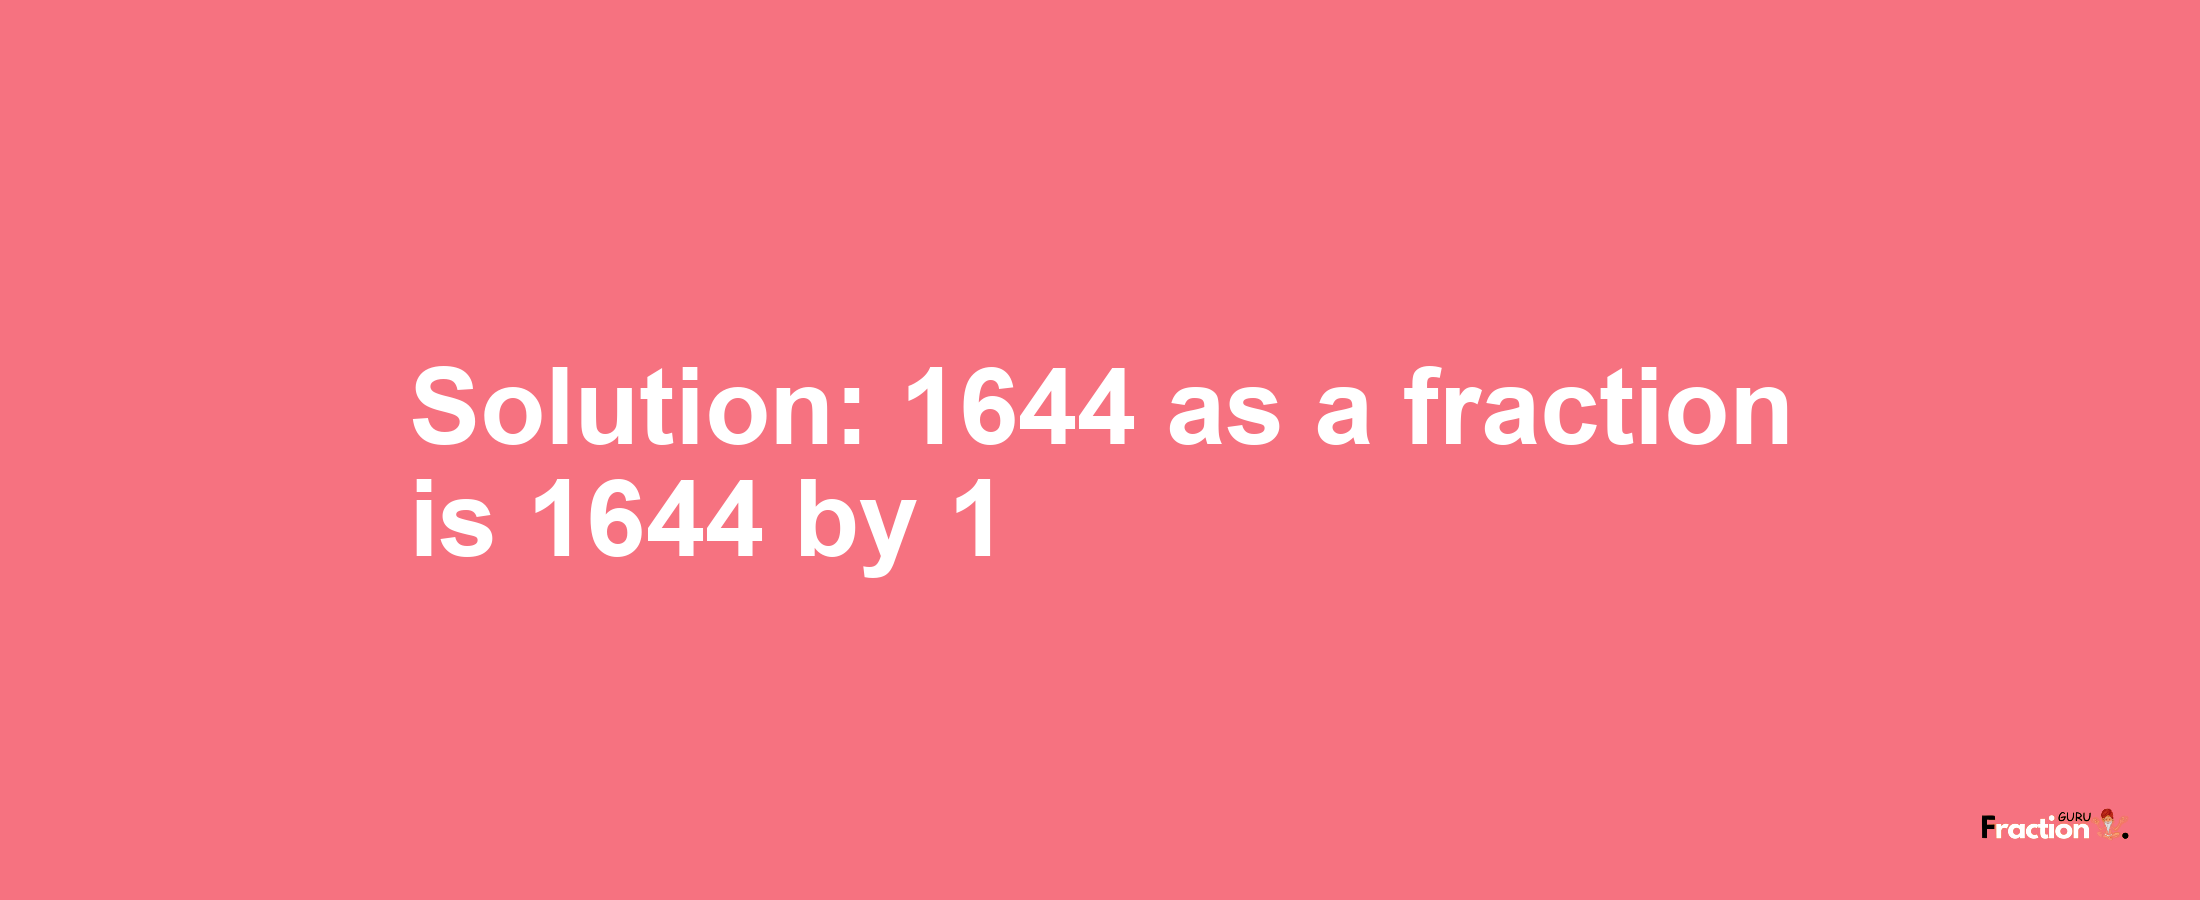 Solution:1644 as a fraction is 1644/1